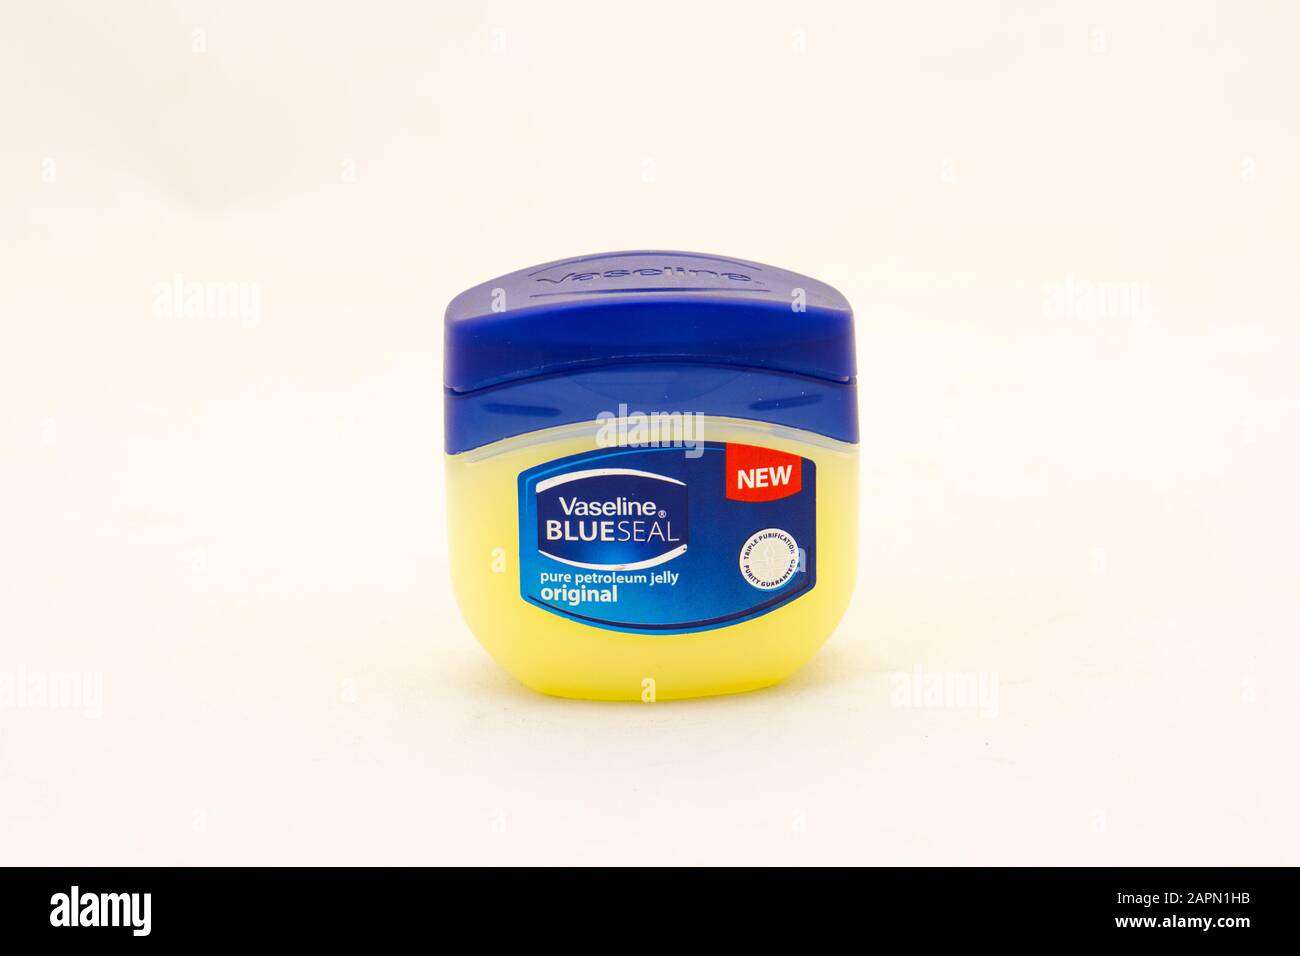 Alberton, South Africa - a tub of BlueSeal vaseline isolated on a clear background image in horizontal format with copy space Stock Photo